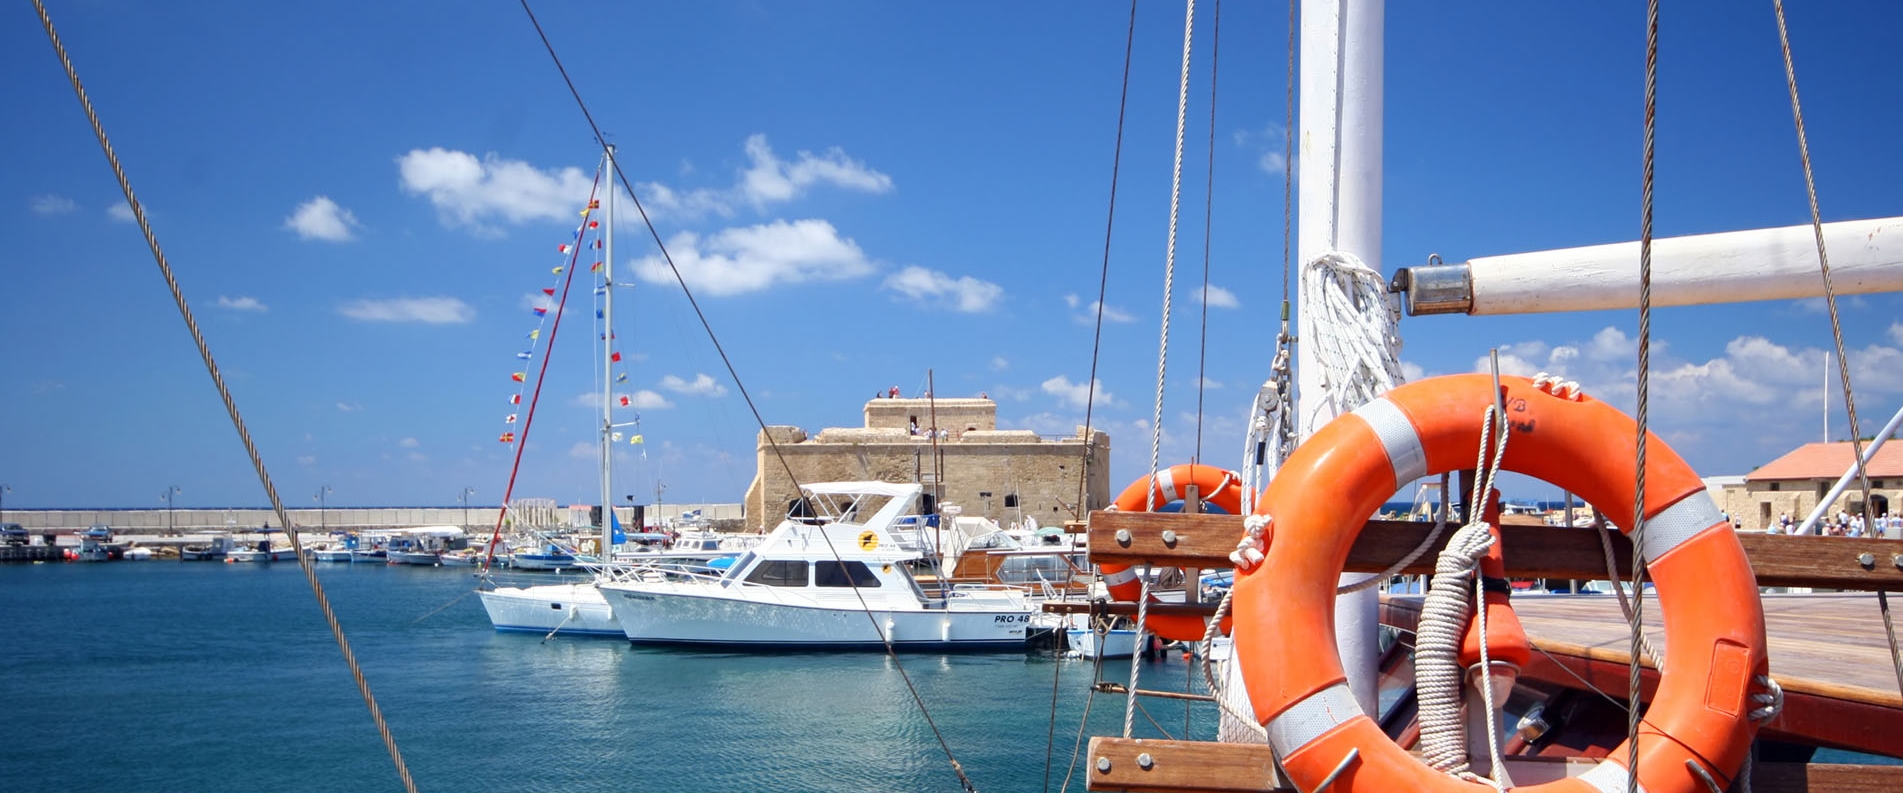 Things to do in Paphos: tourist attractions, museums and restaurants